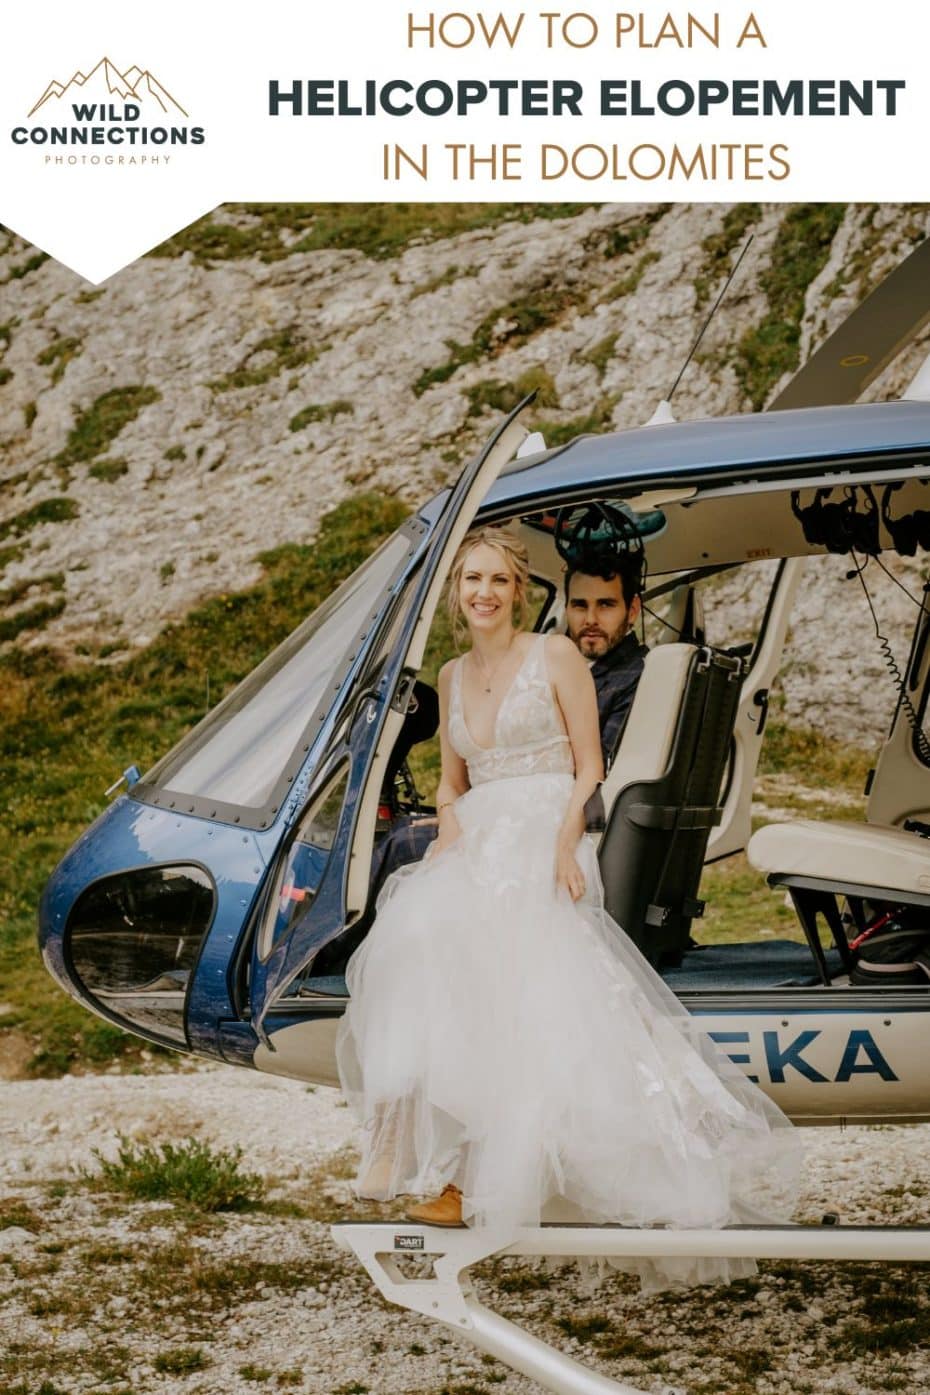 dolomites helicopter elopement planning guide